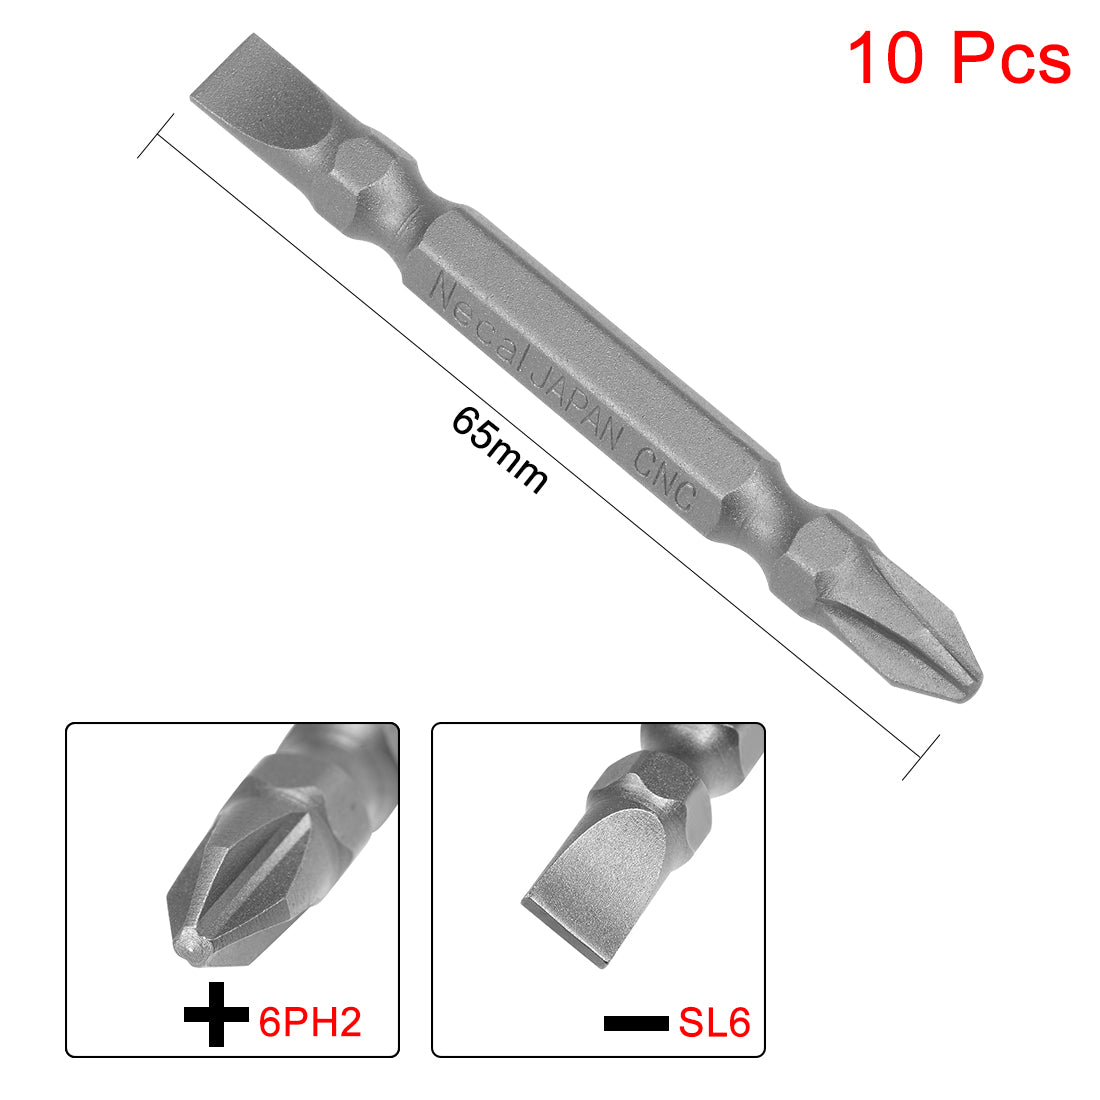 Uxcell Uxcell 10Pcs 150mm Long S2 Magnetic Phillips-Slotted Screwdriver Bits 6PH2 SL6 Hex Head